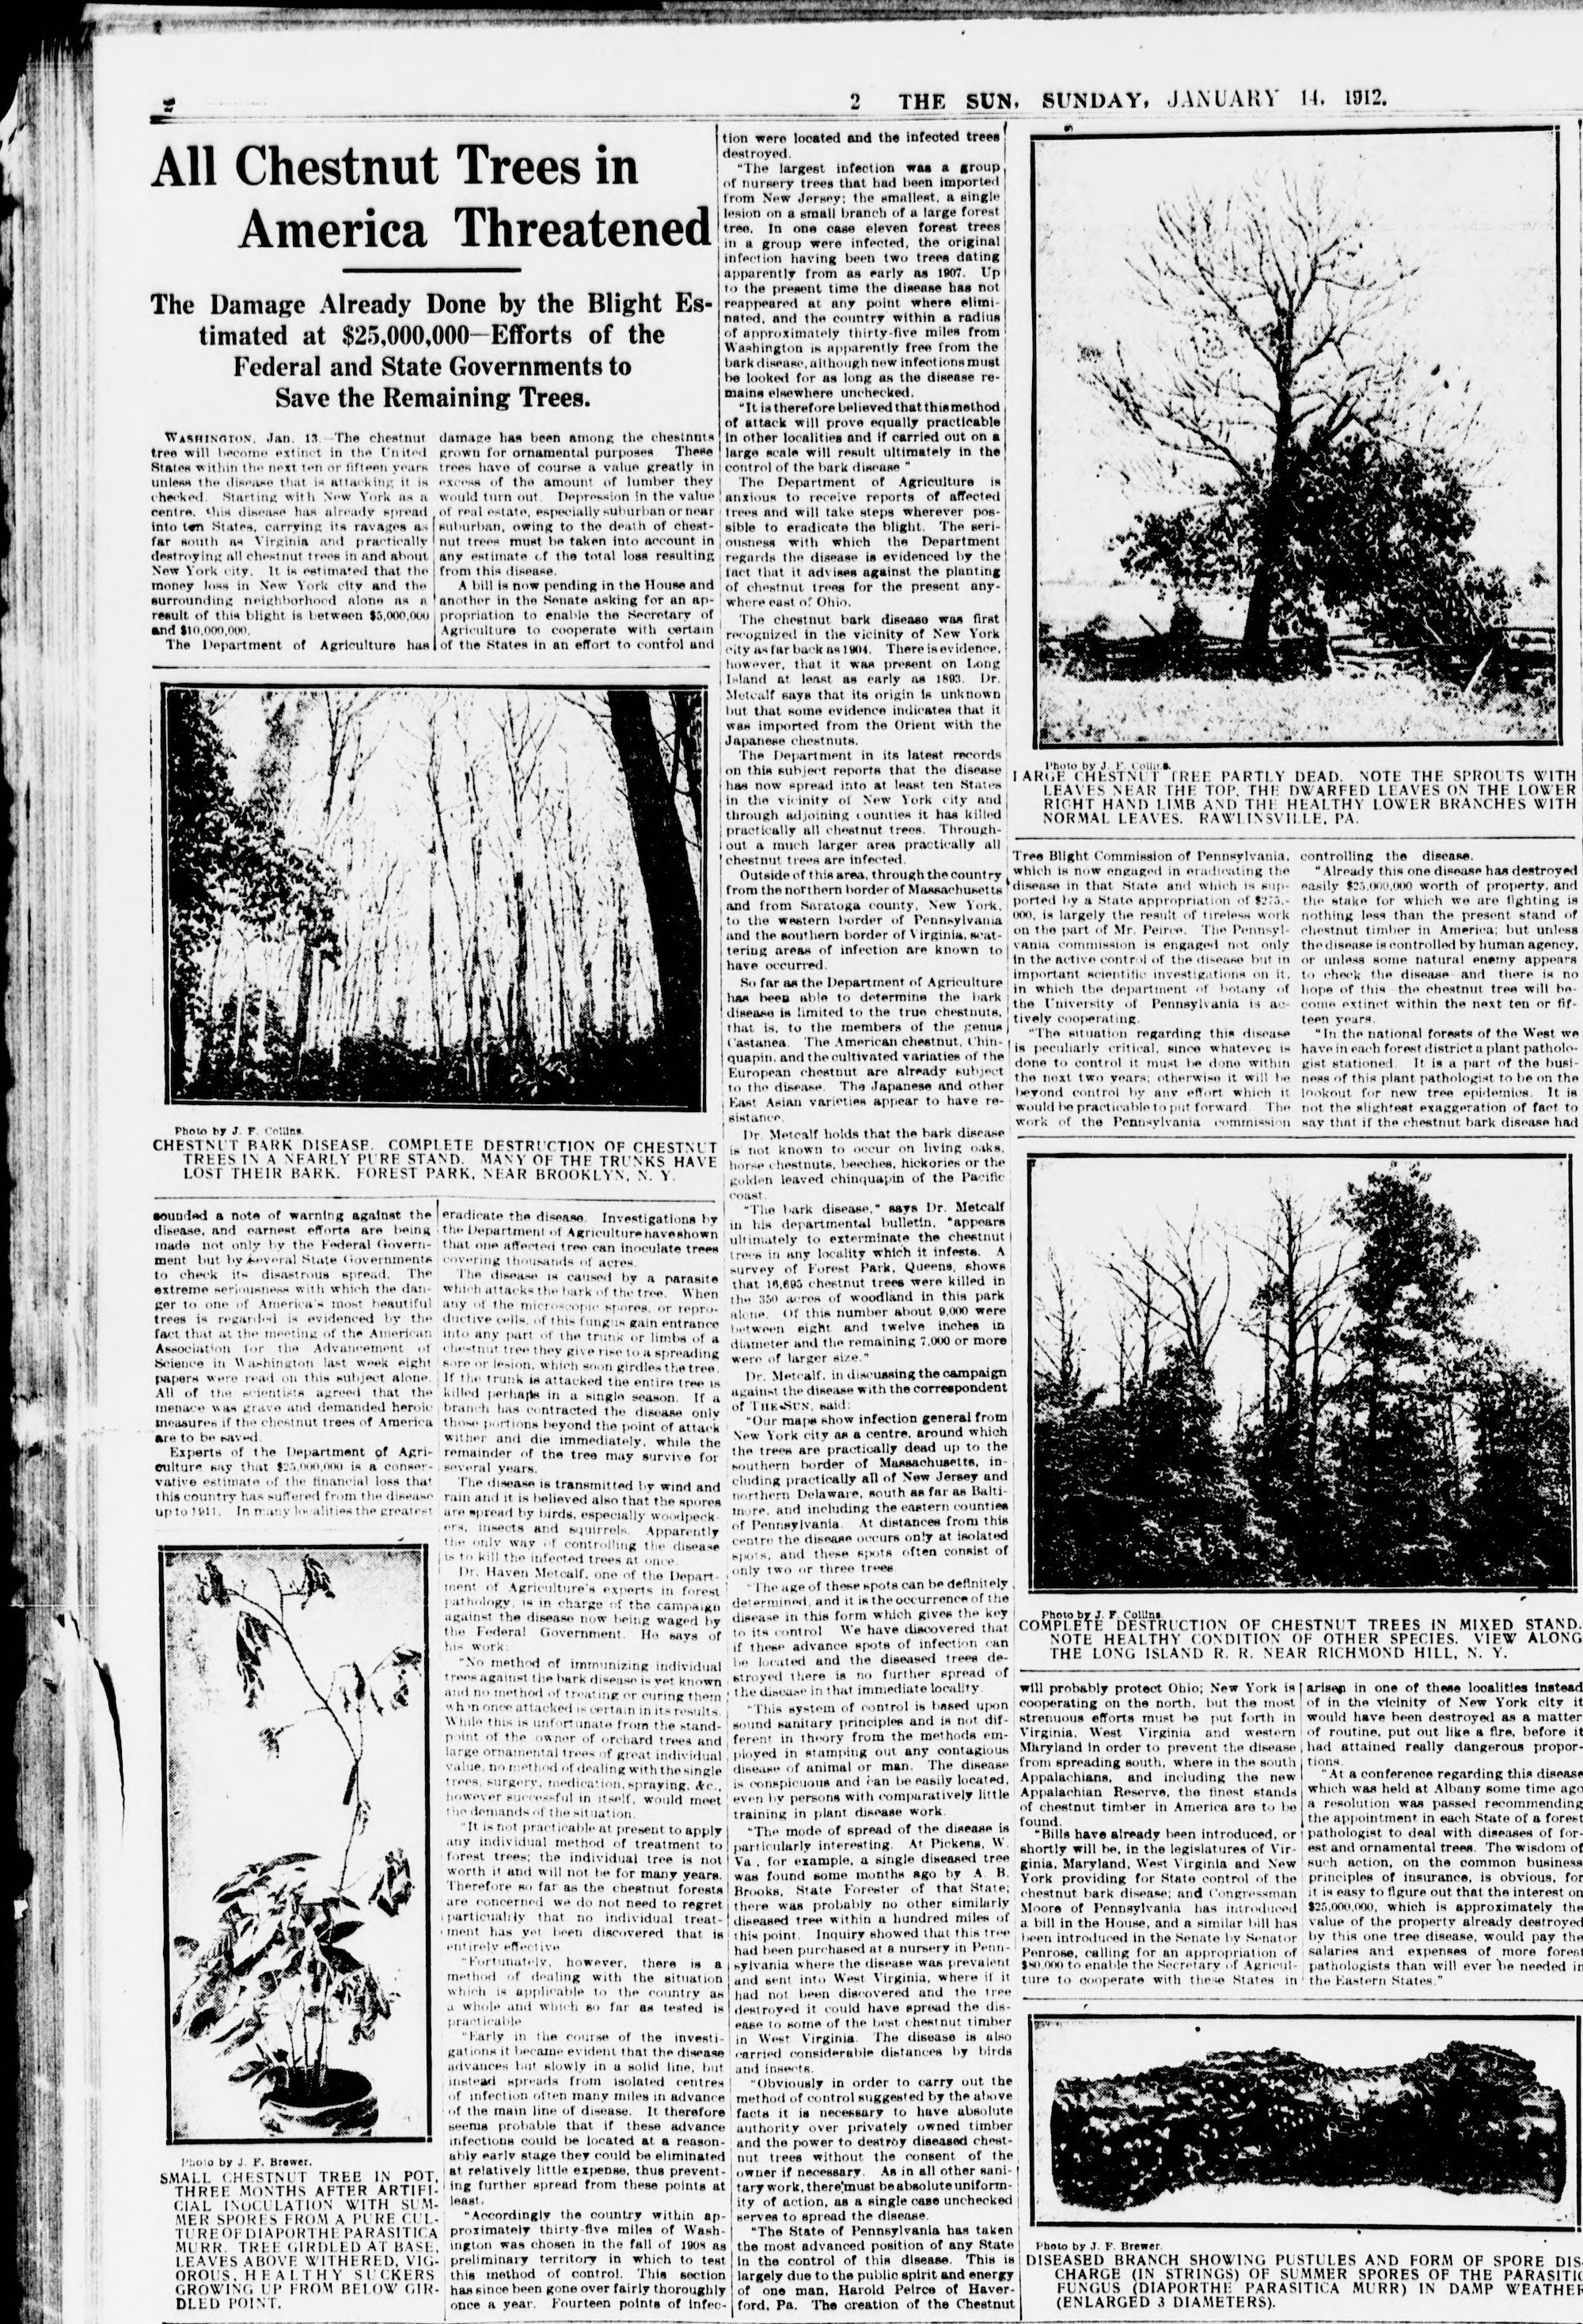 a newspaper clipping about diseased american chestnut trees